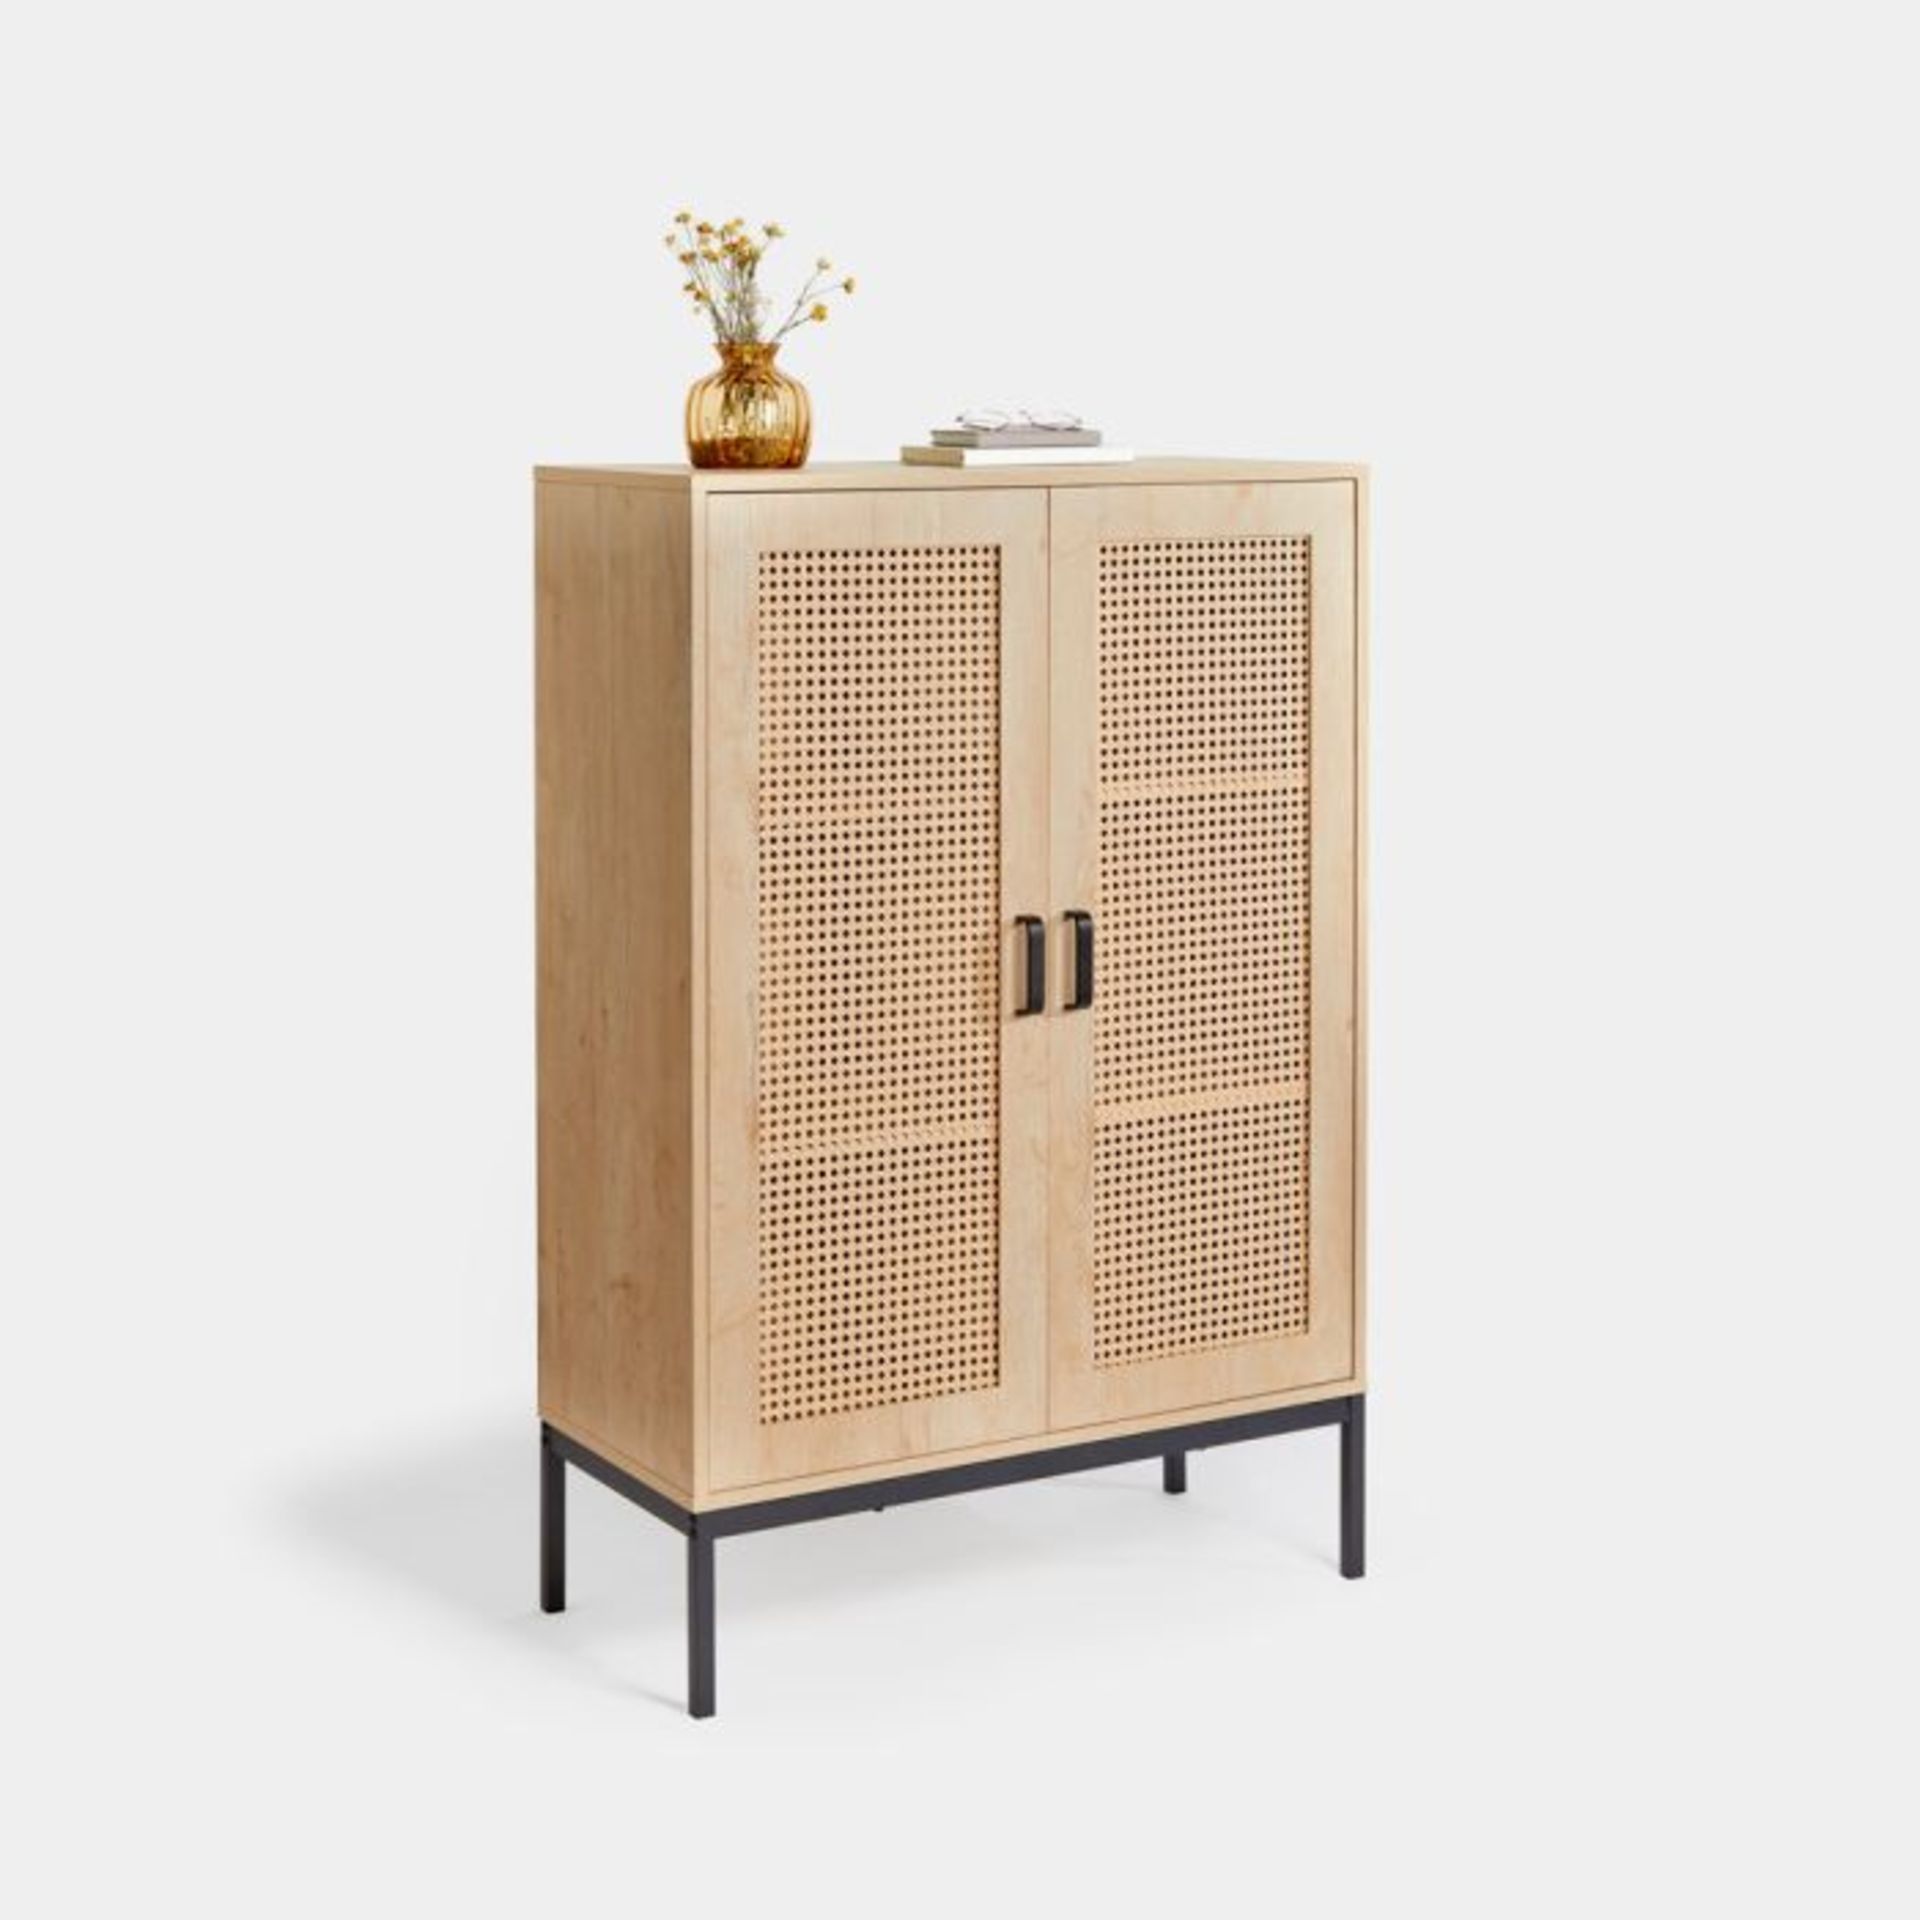 Lena Rattan 2 Door Tall Sideboard. - ER38. Adorned with an interwoven rattan cover, the Lena